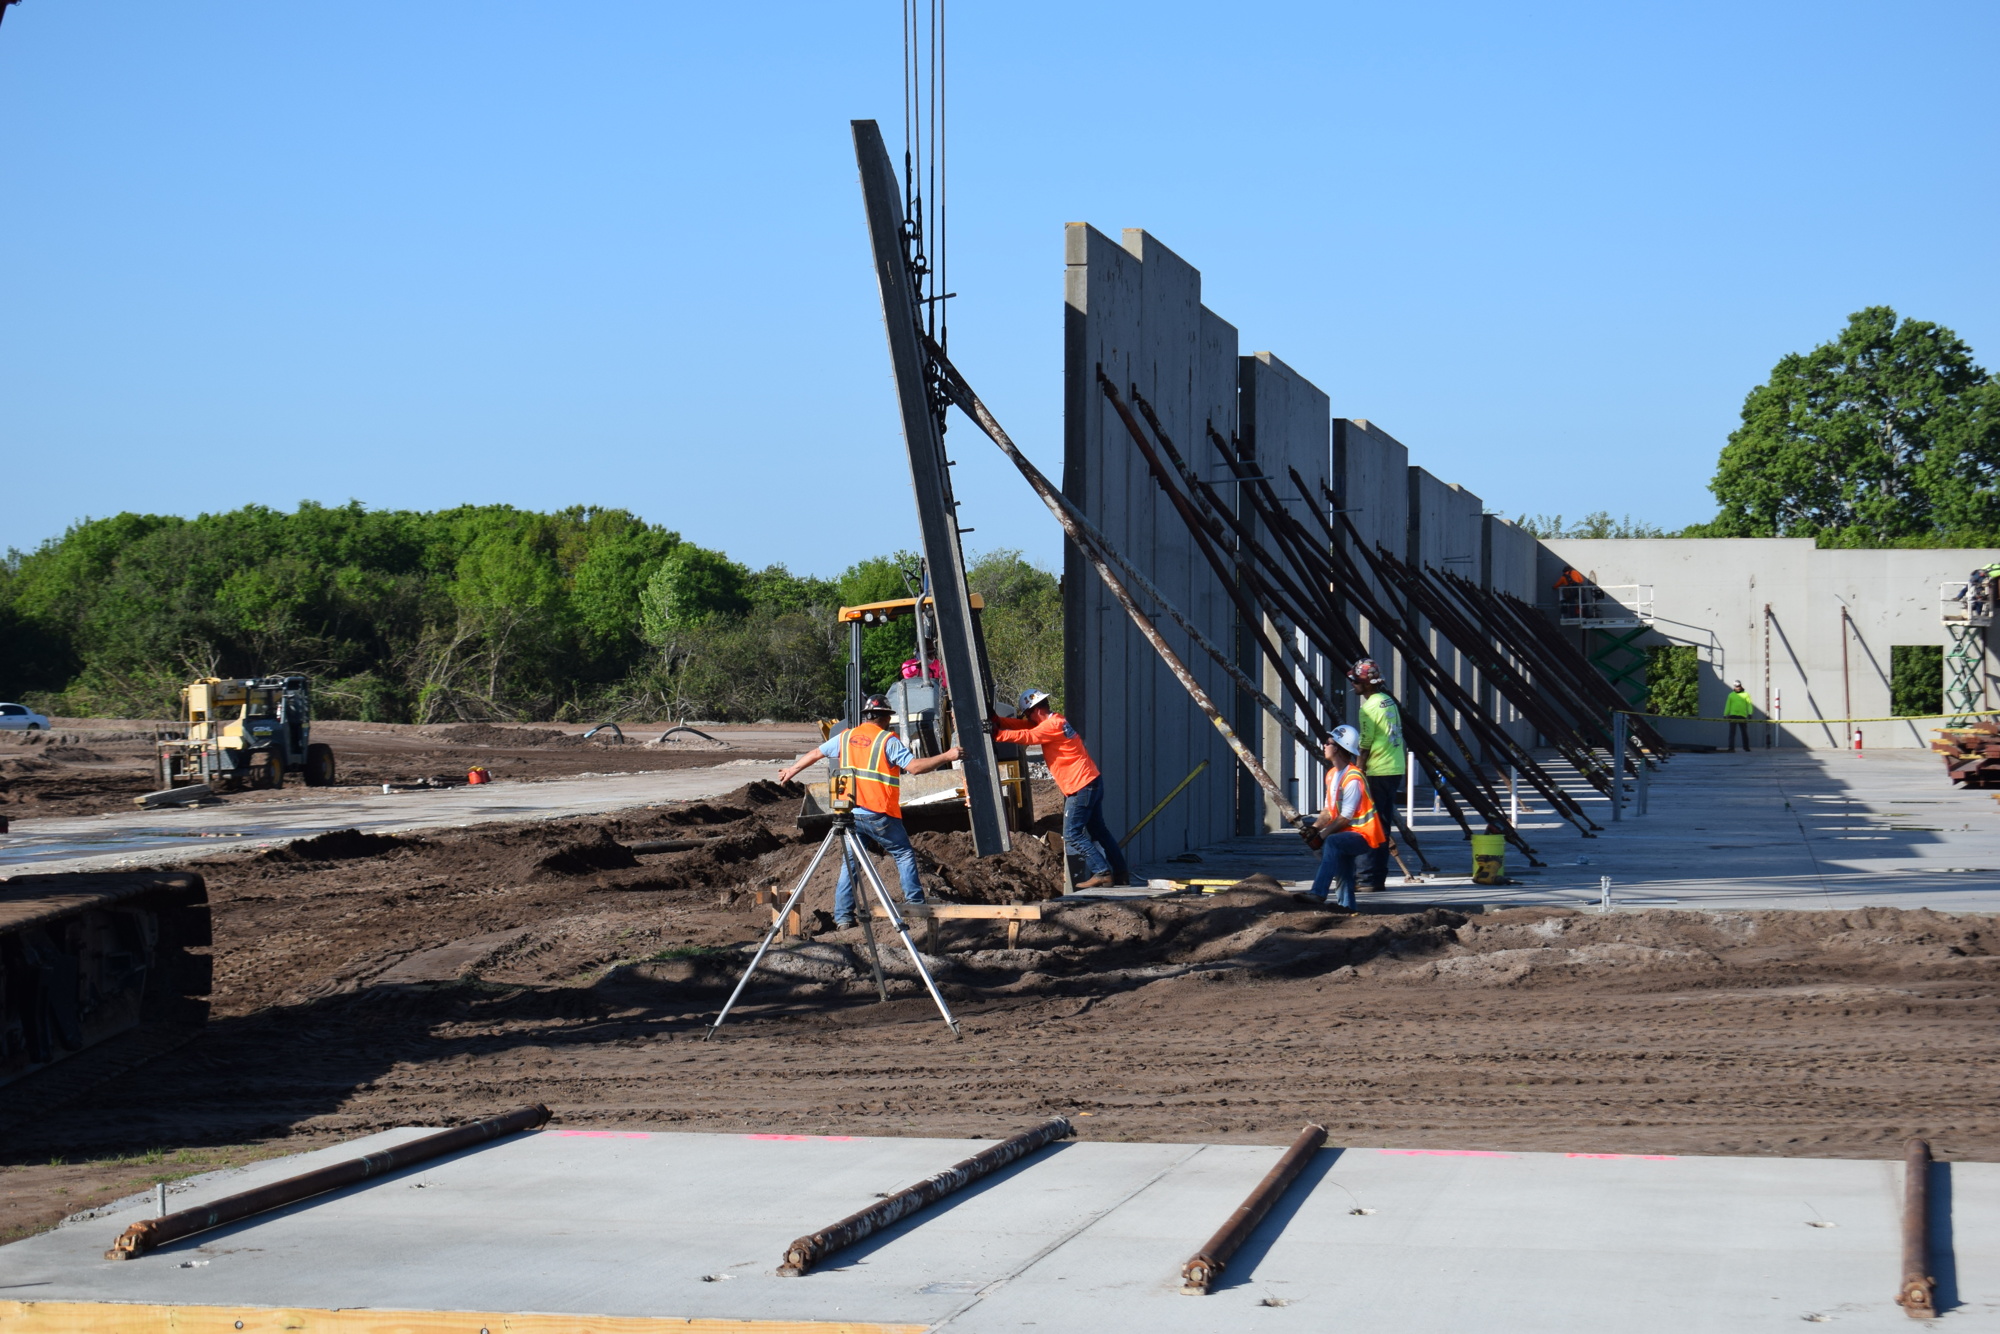 In March, workers put sections of the walls of Lakewood Ranch Preparatory Academy into place.